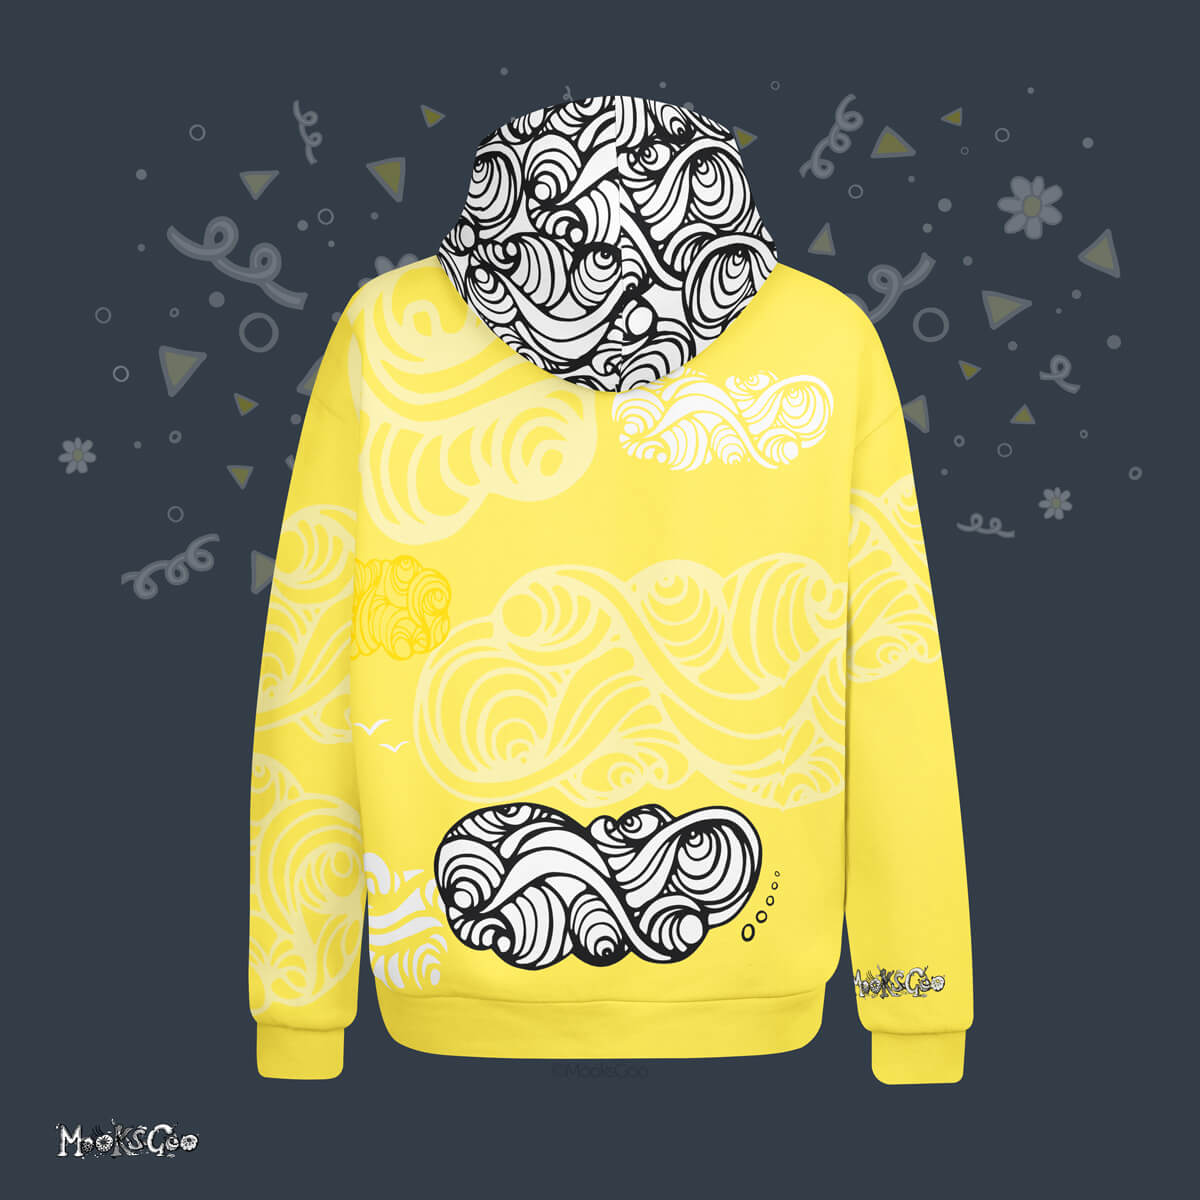 Back view of the Sunny sunshine yellow, black and white quirky hoodie, with sizes from XS to 3XL. Designed by MooksGoo